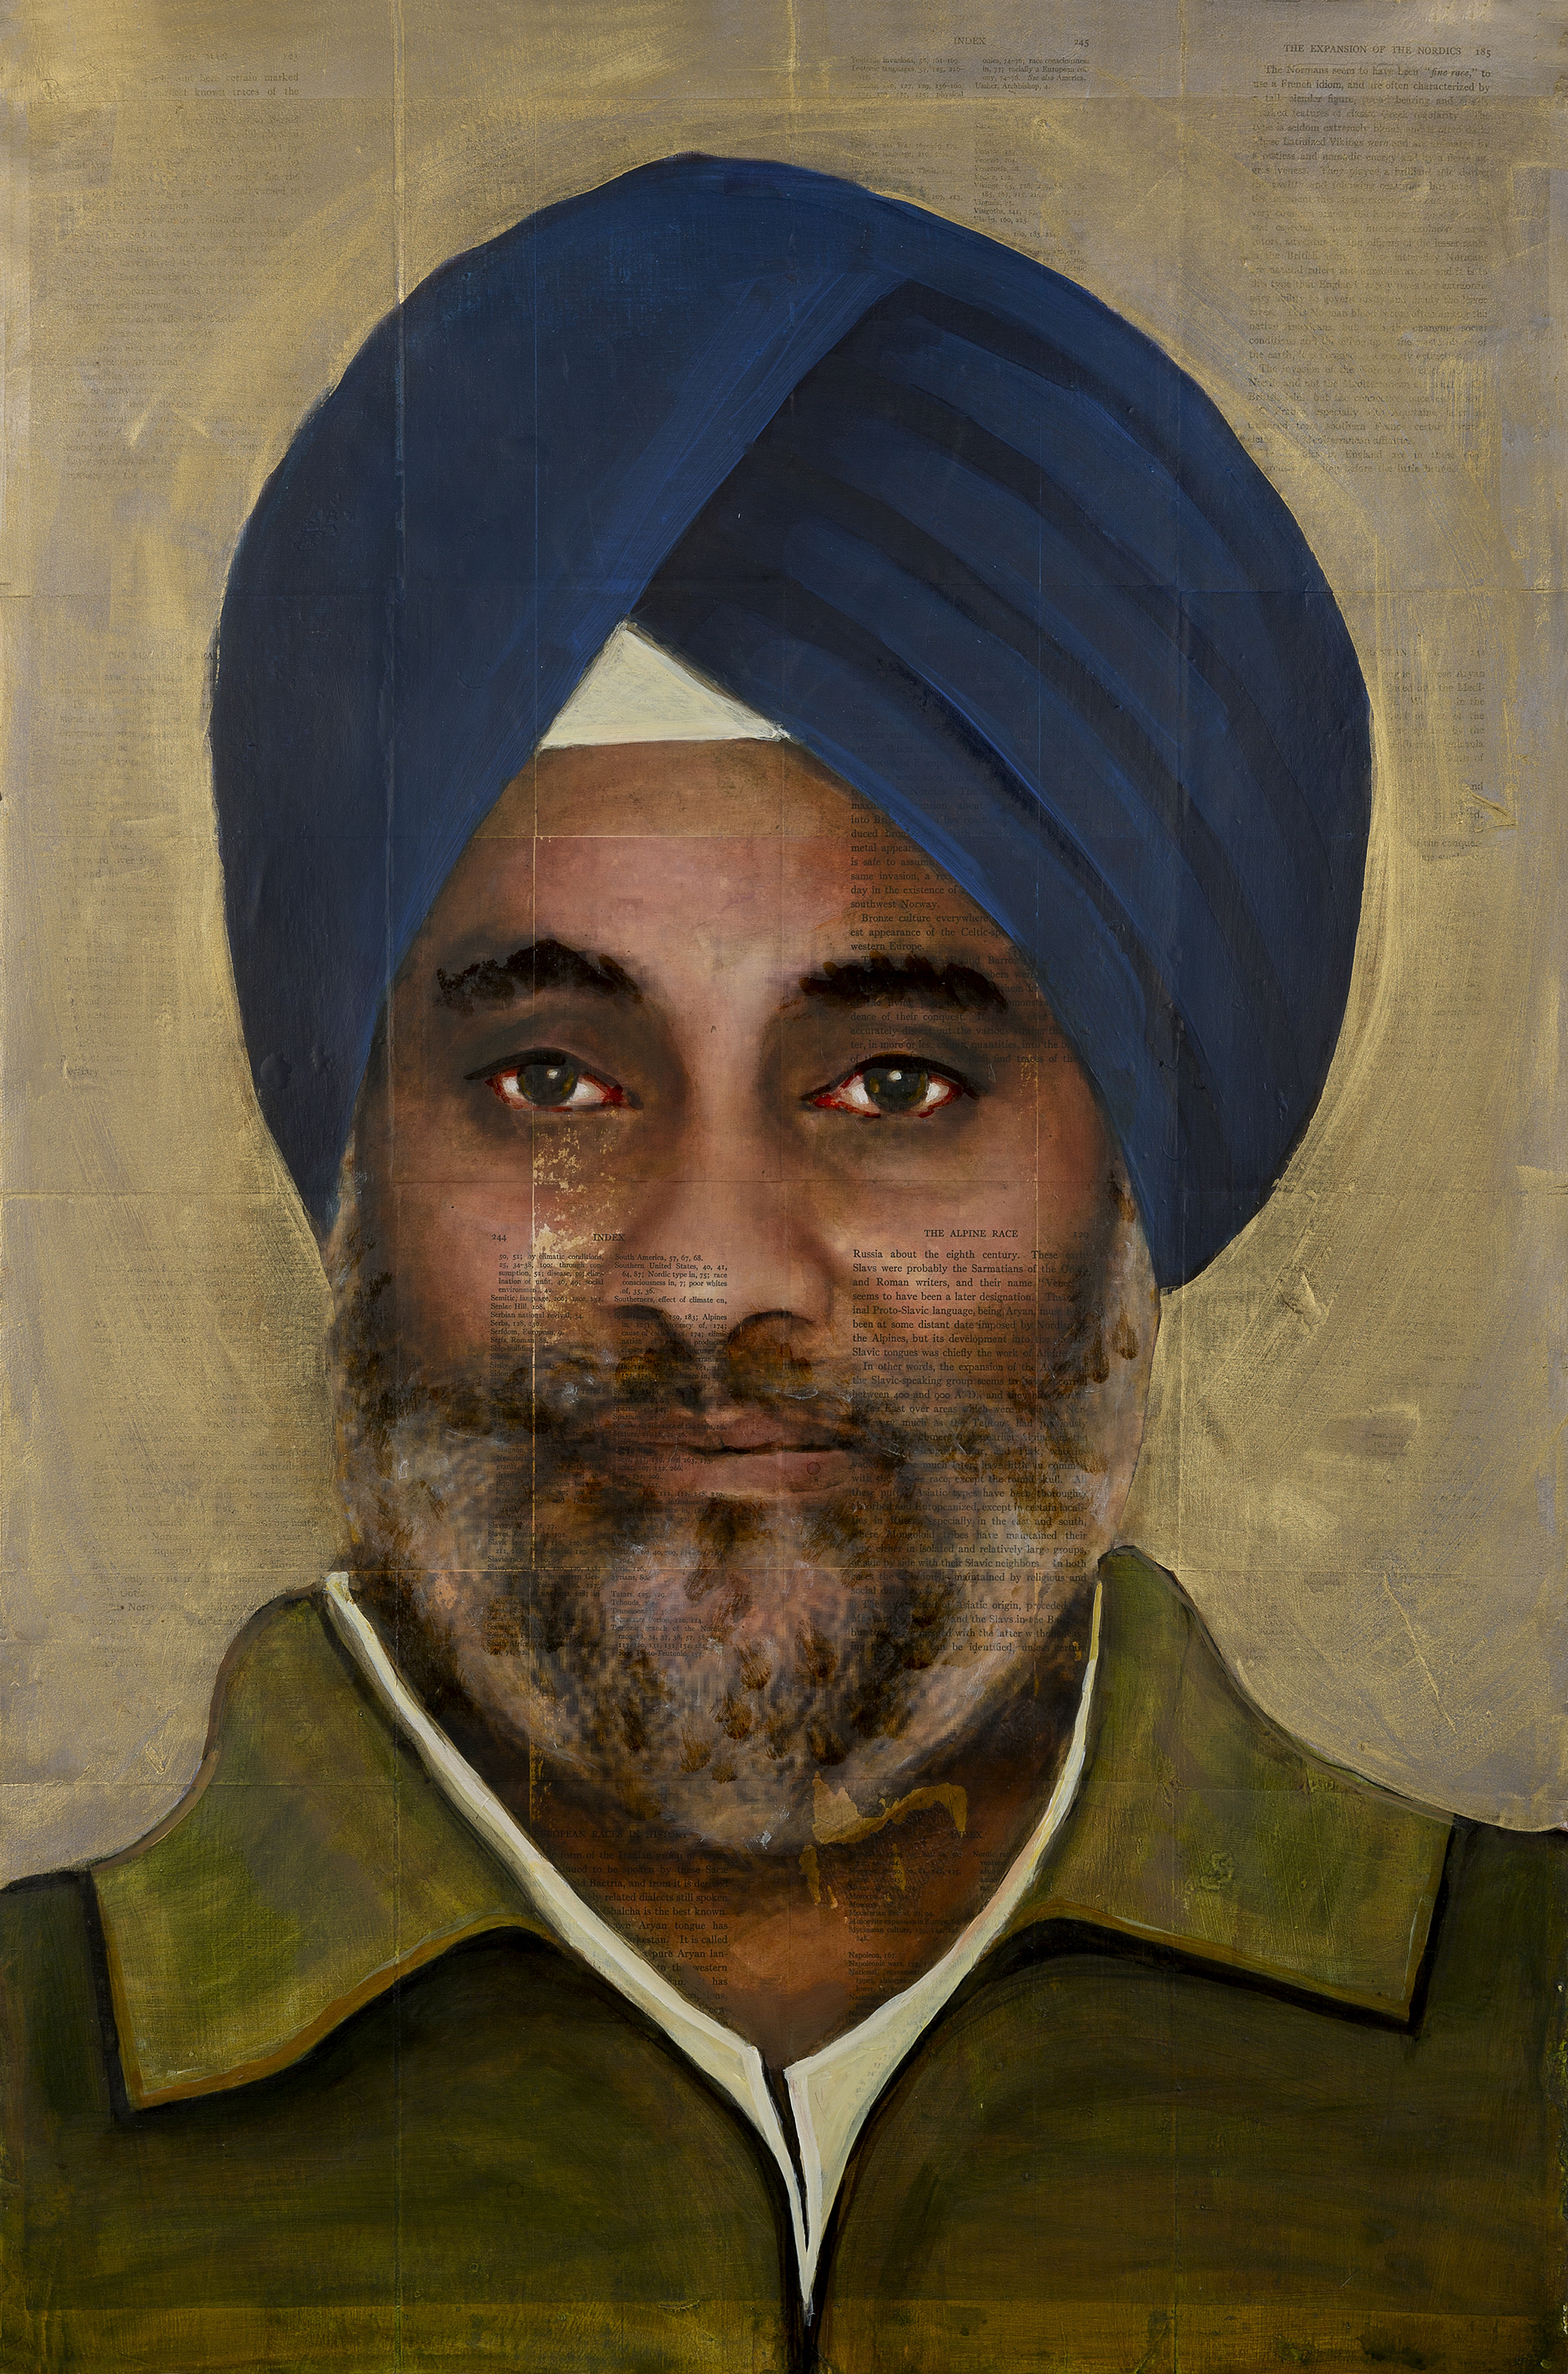 A painting from Rajkamal Kahlon's "Enter My Burning House" depicting a Sikh man.